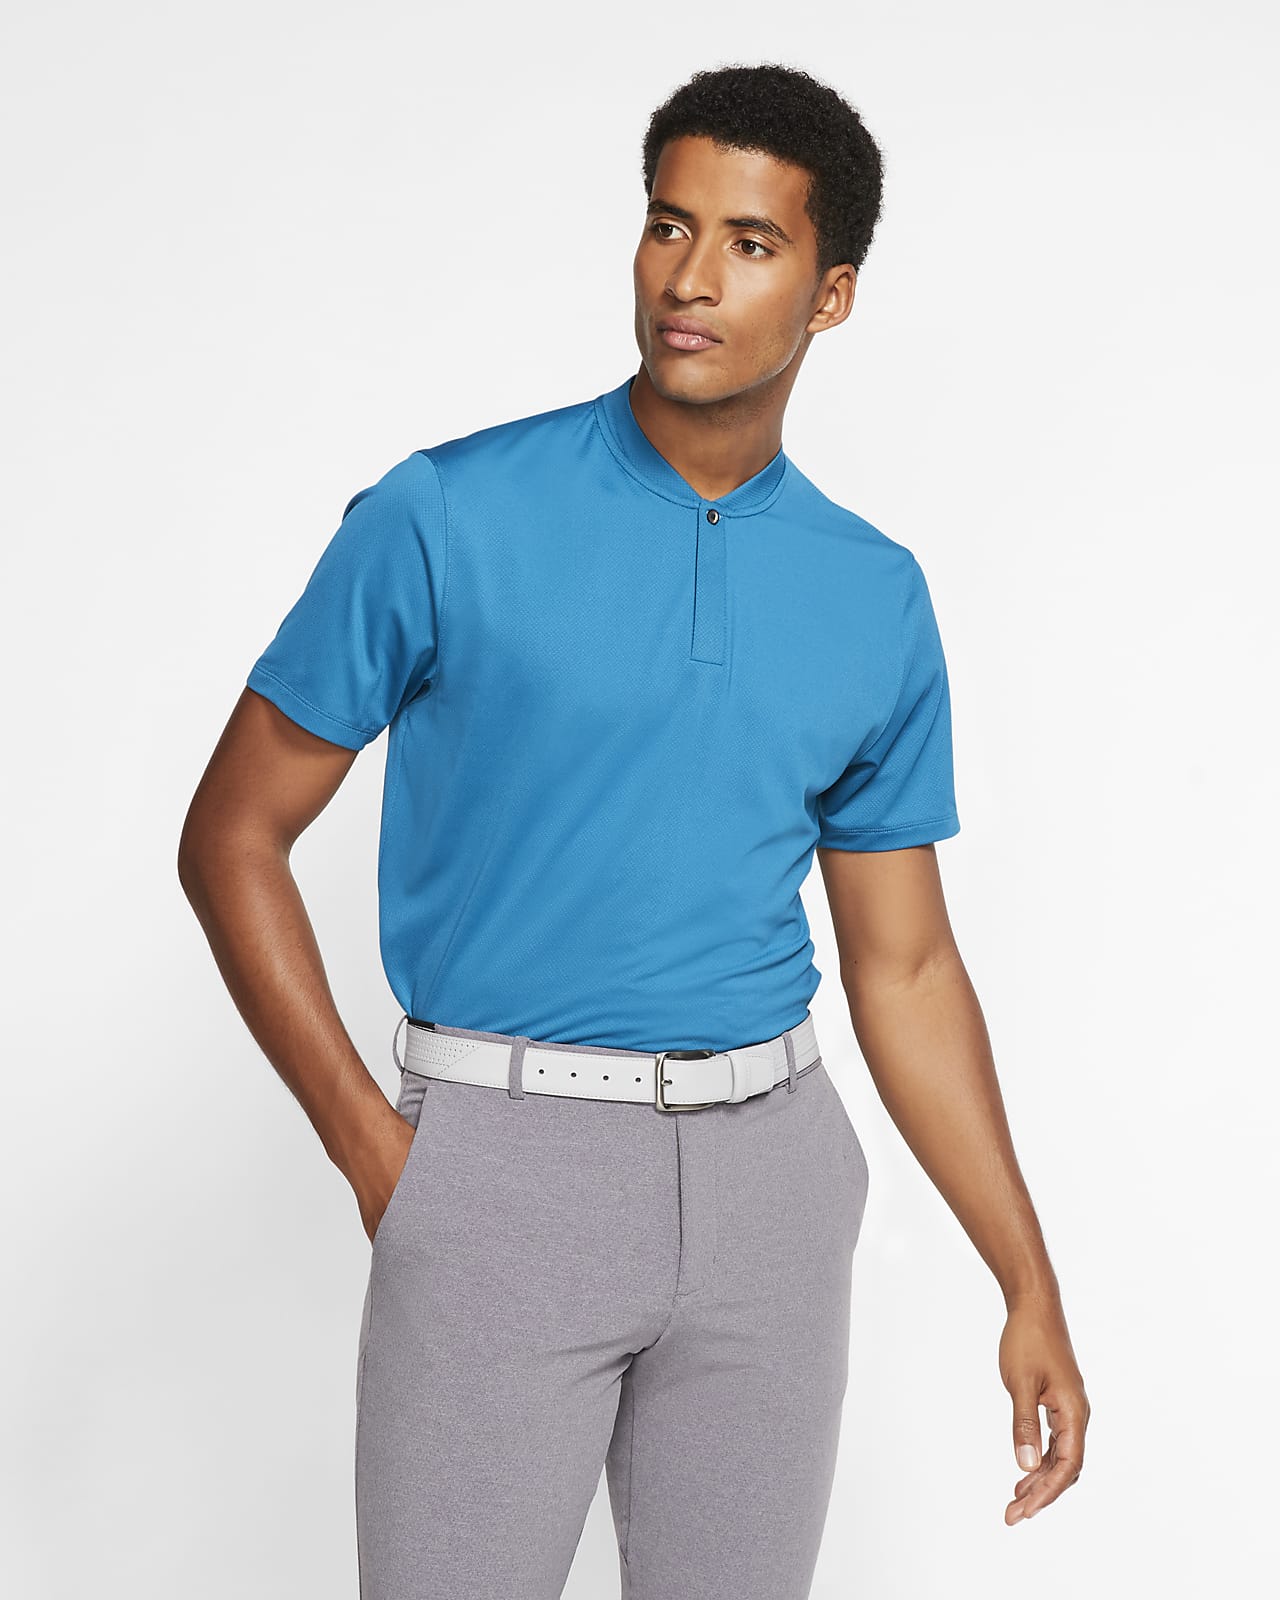 tiger woods polo nike